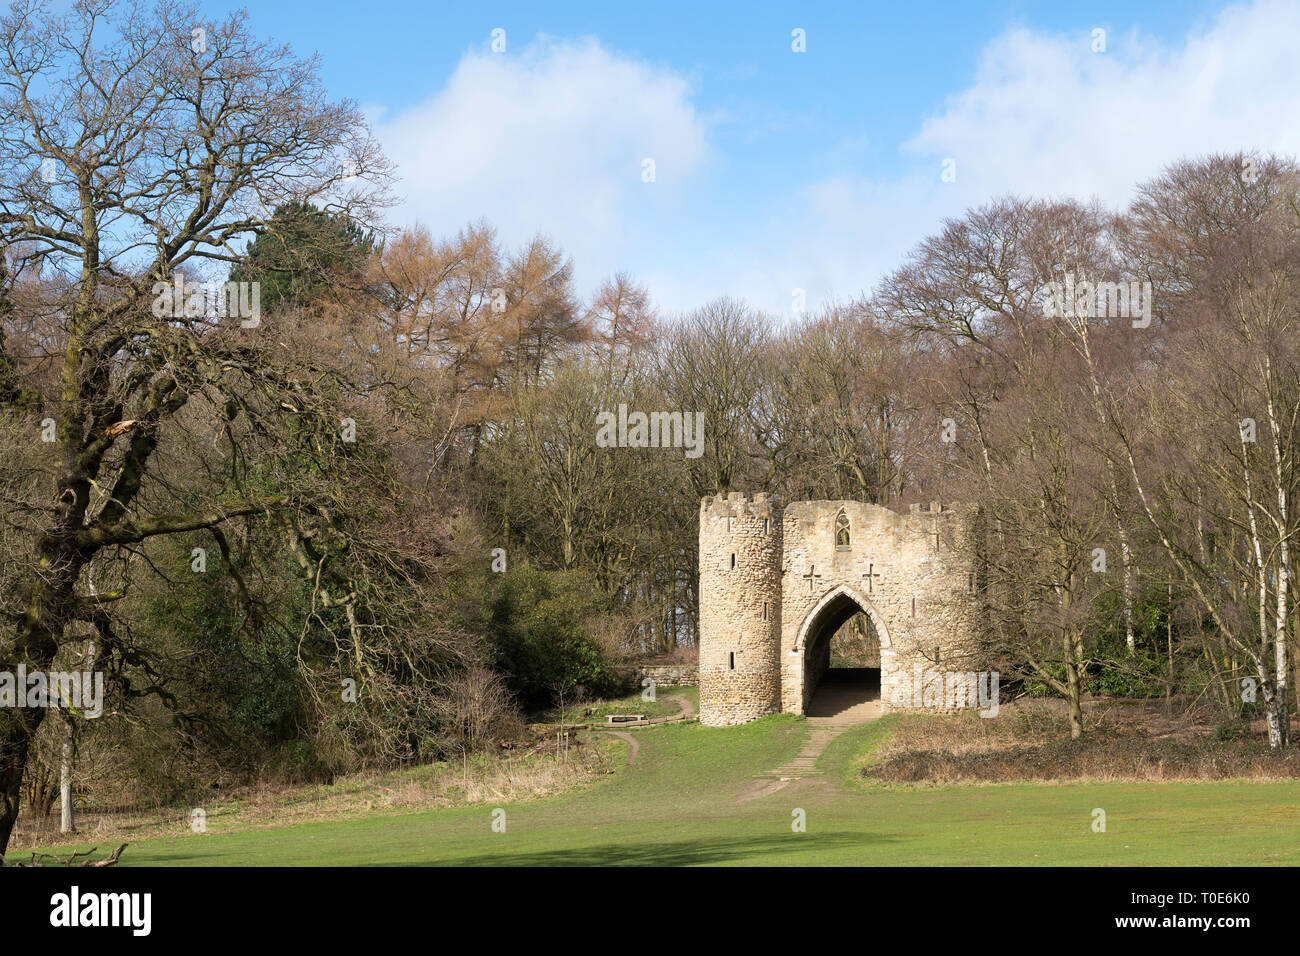 The castle folly in Roundhay Park, Leeds, West Yorkshire, England, UK Stock Photo